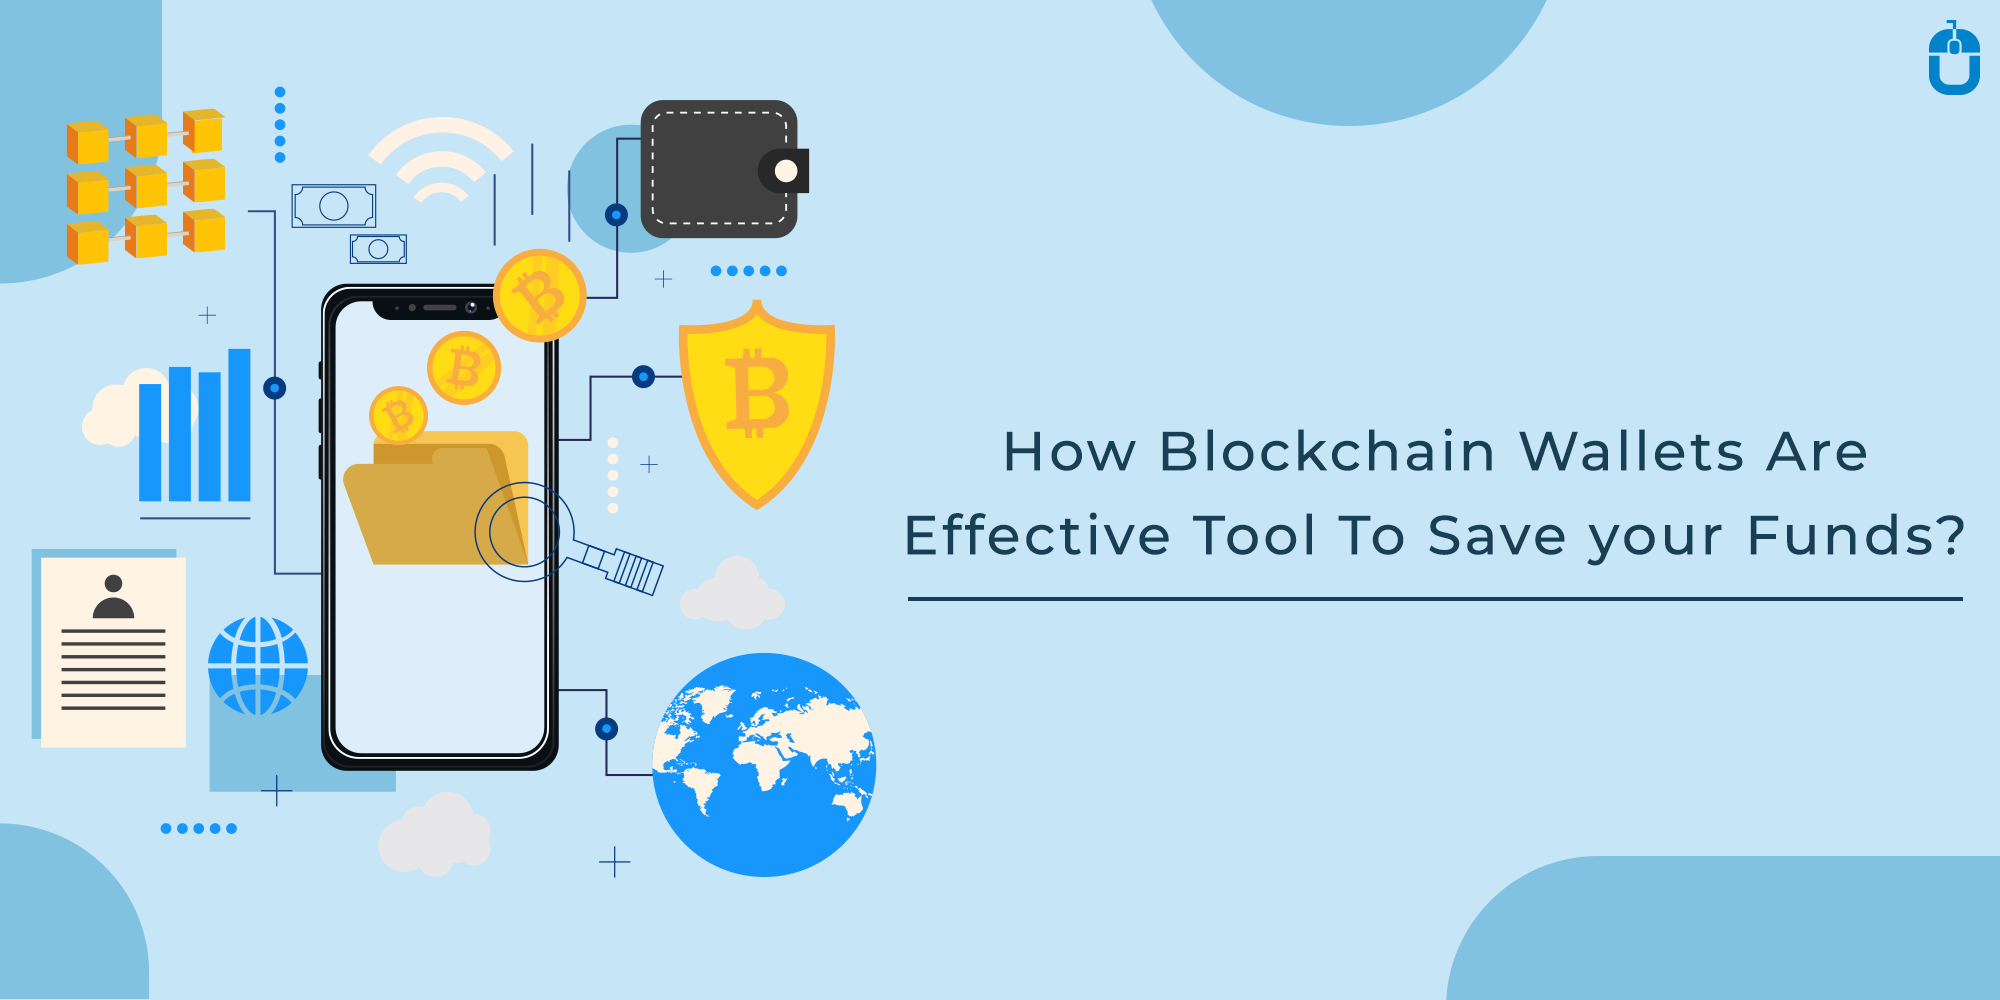 How Blockchain Wallets Are Effective Tool To Save your Funds?